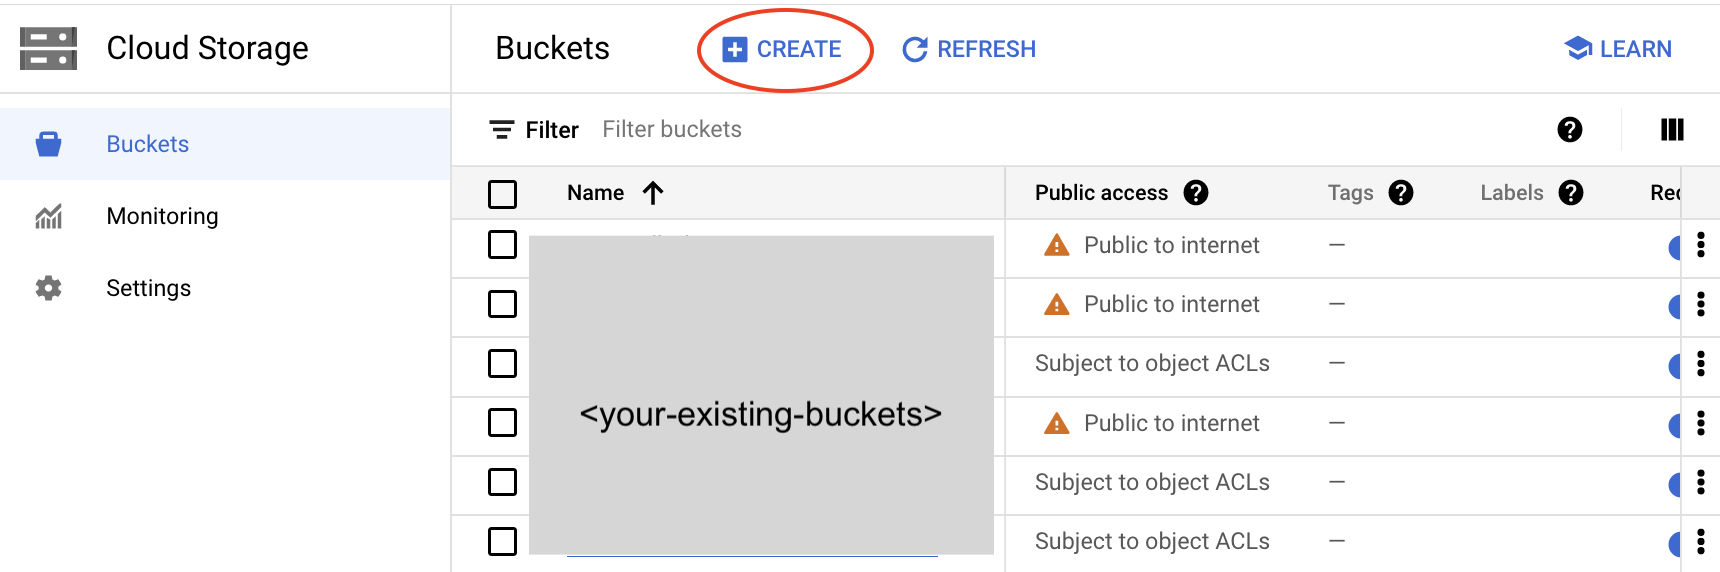 image showing how to create GCP bucket